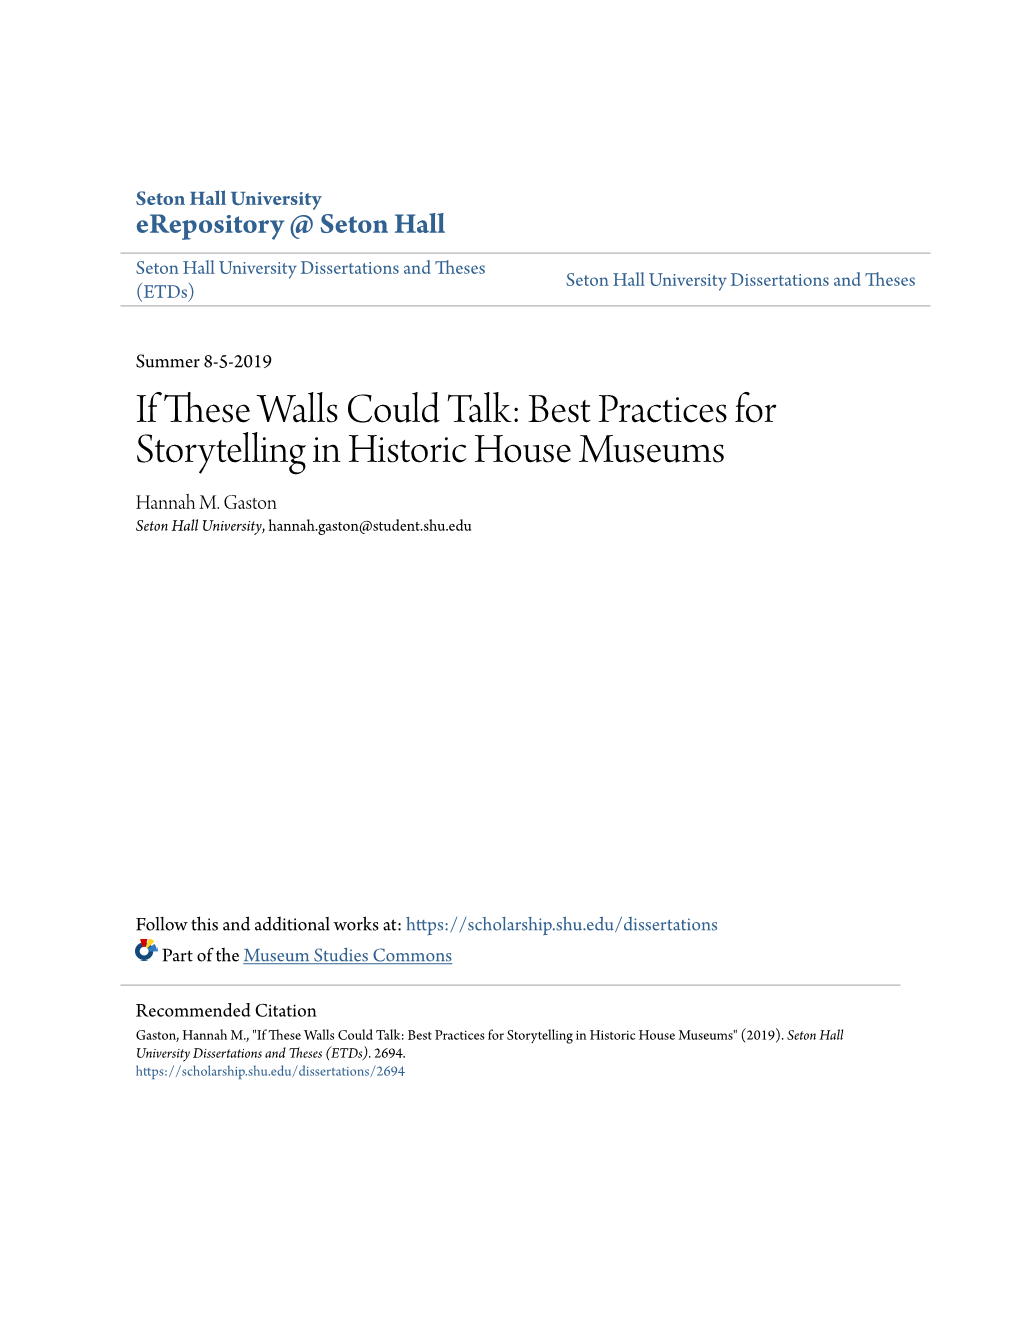 Best Practices for Storytelling in Historic House Museums Hannah M